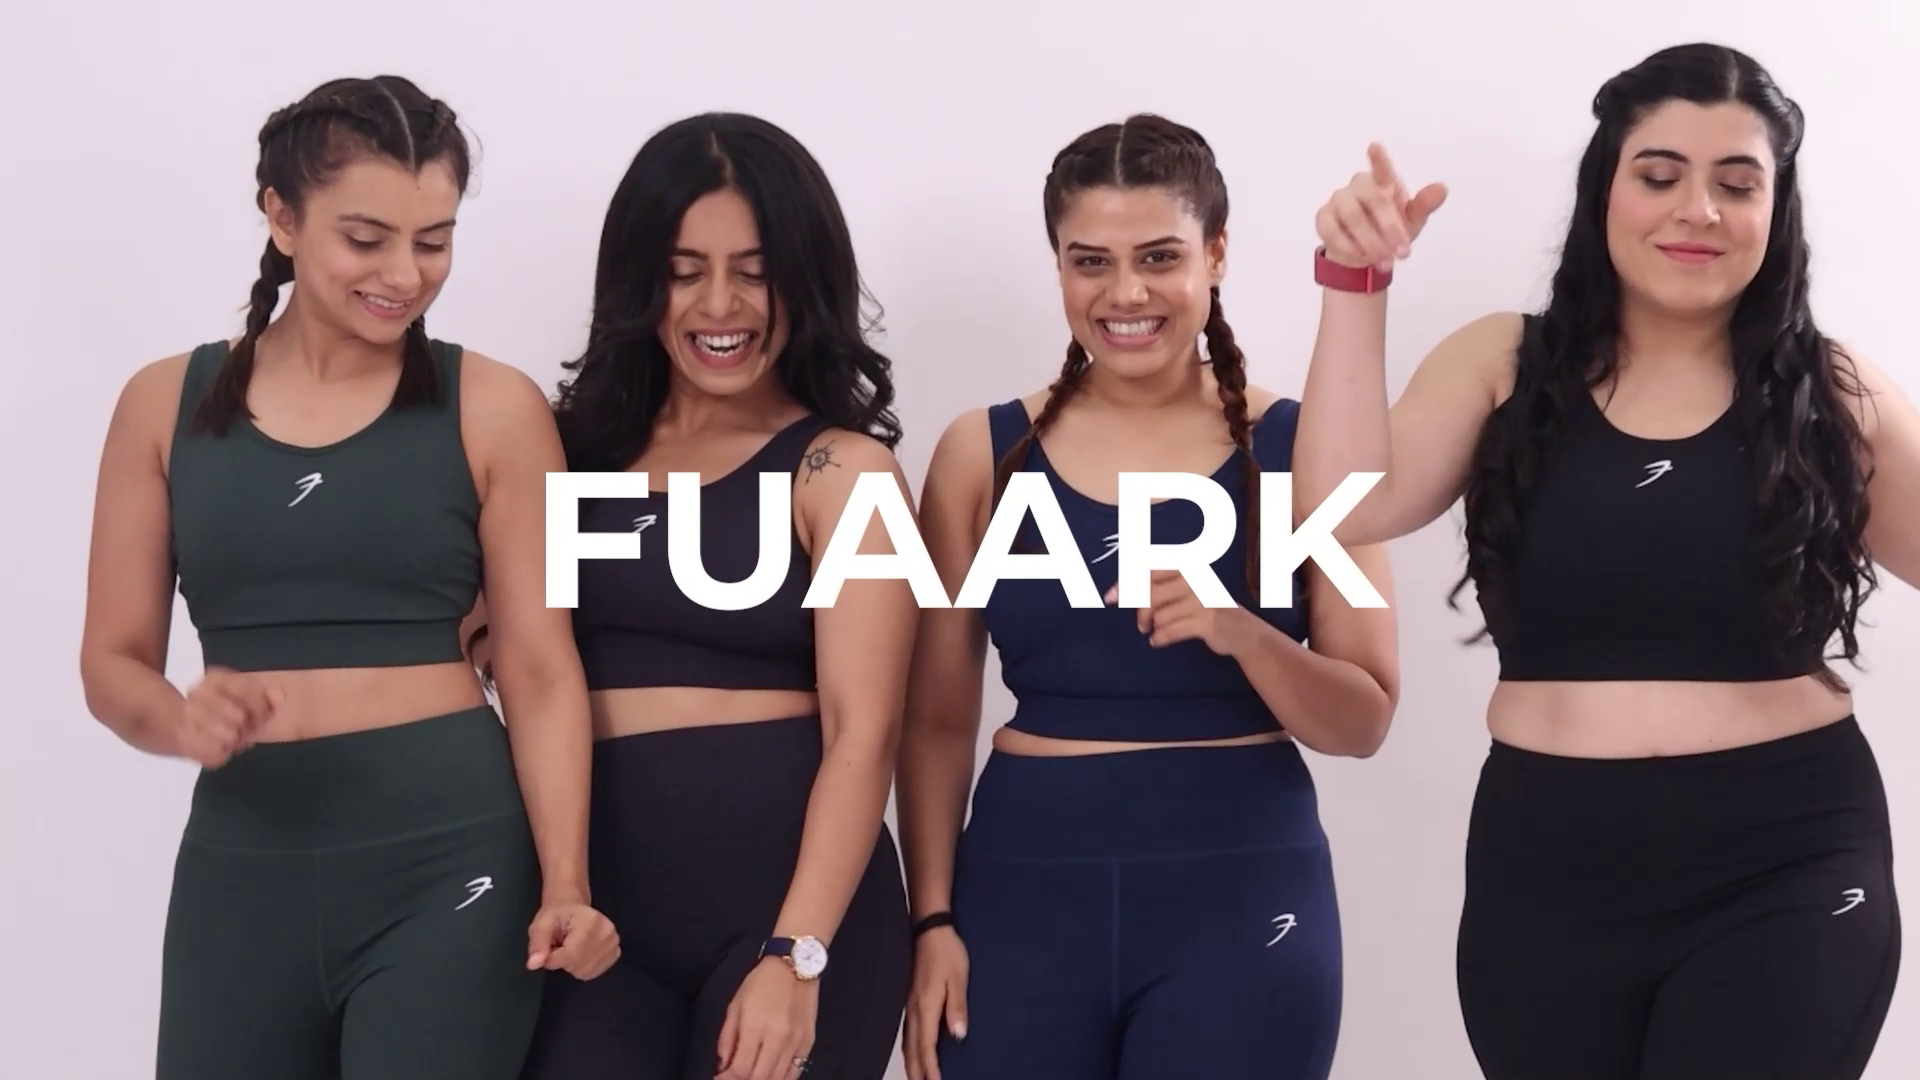 Gym wear & sports active wear for women online [Gym clothing] – FUAARK